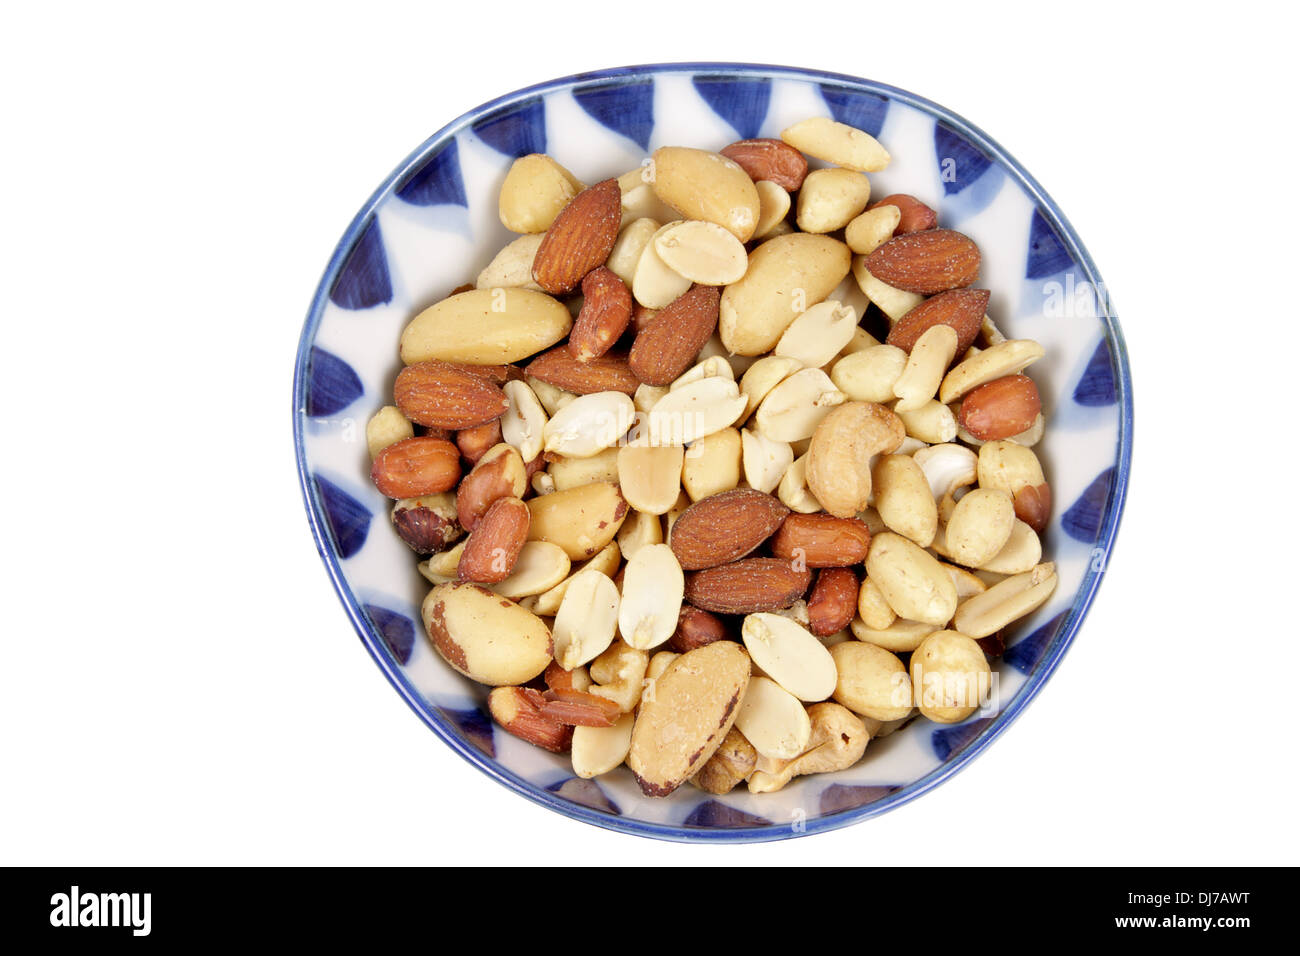 Bowl of Mixed Nuts Stock Photo